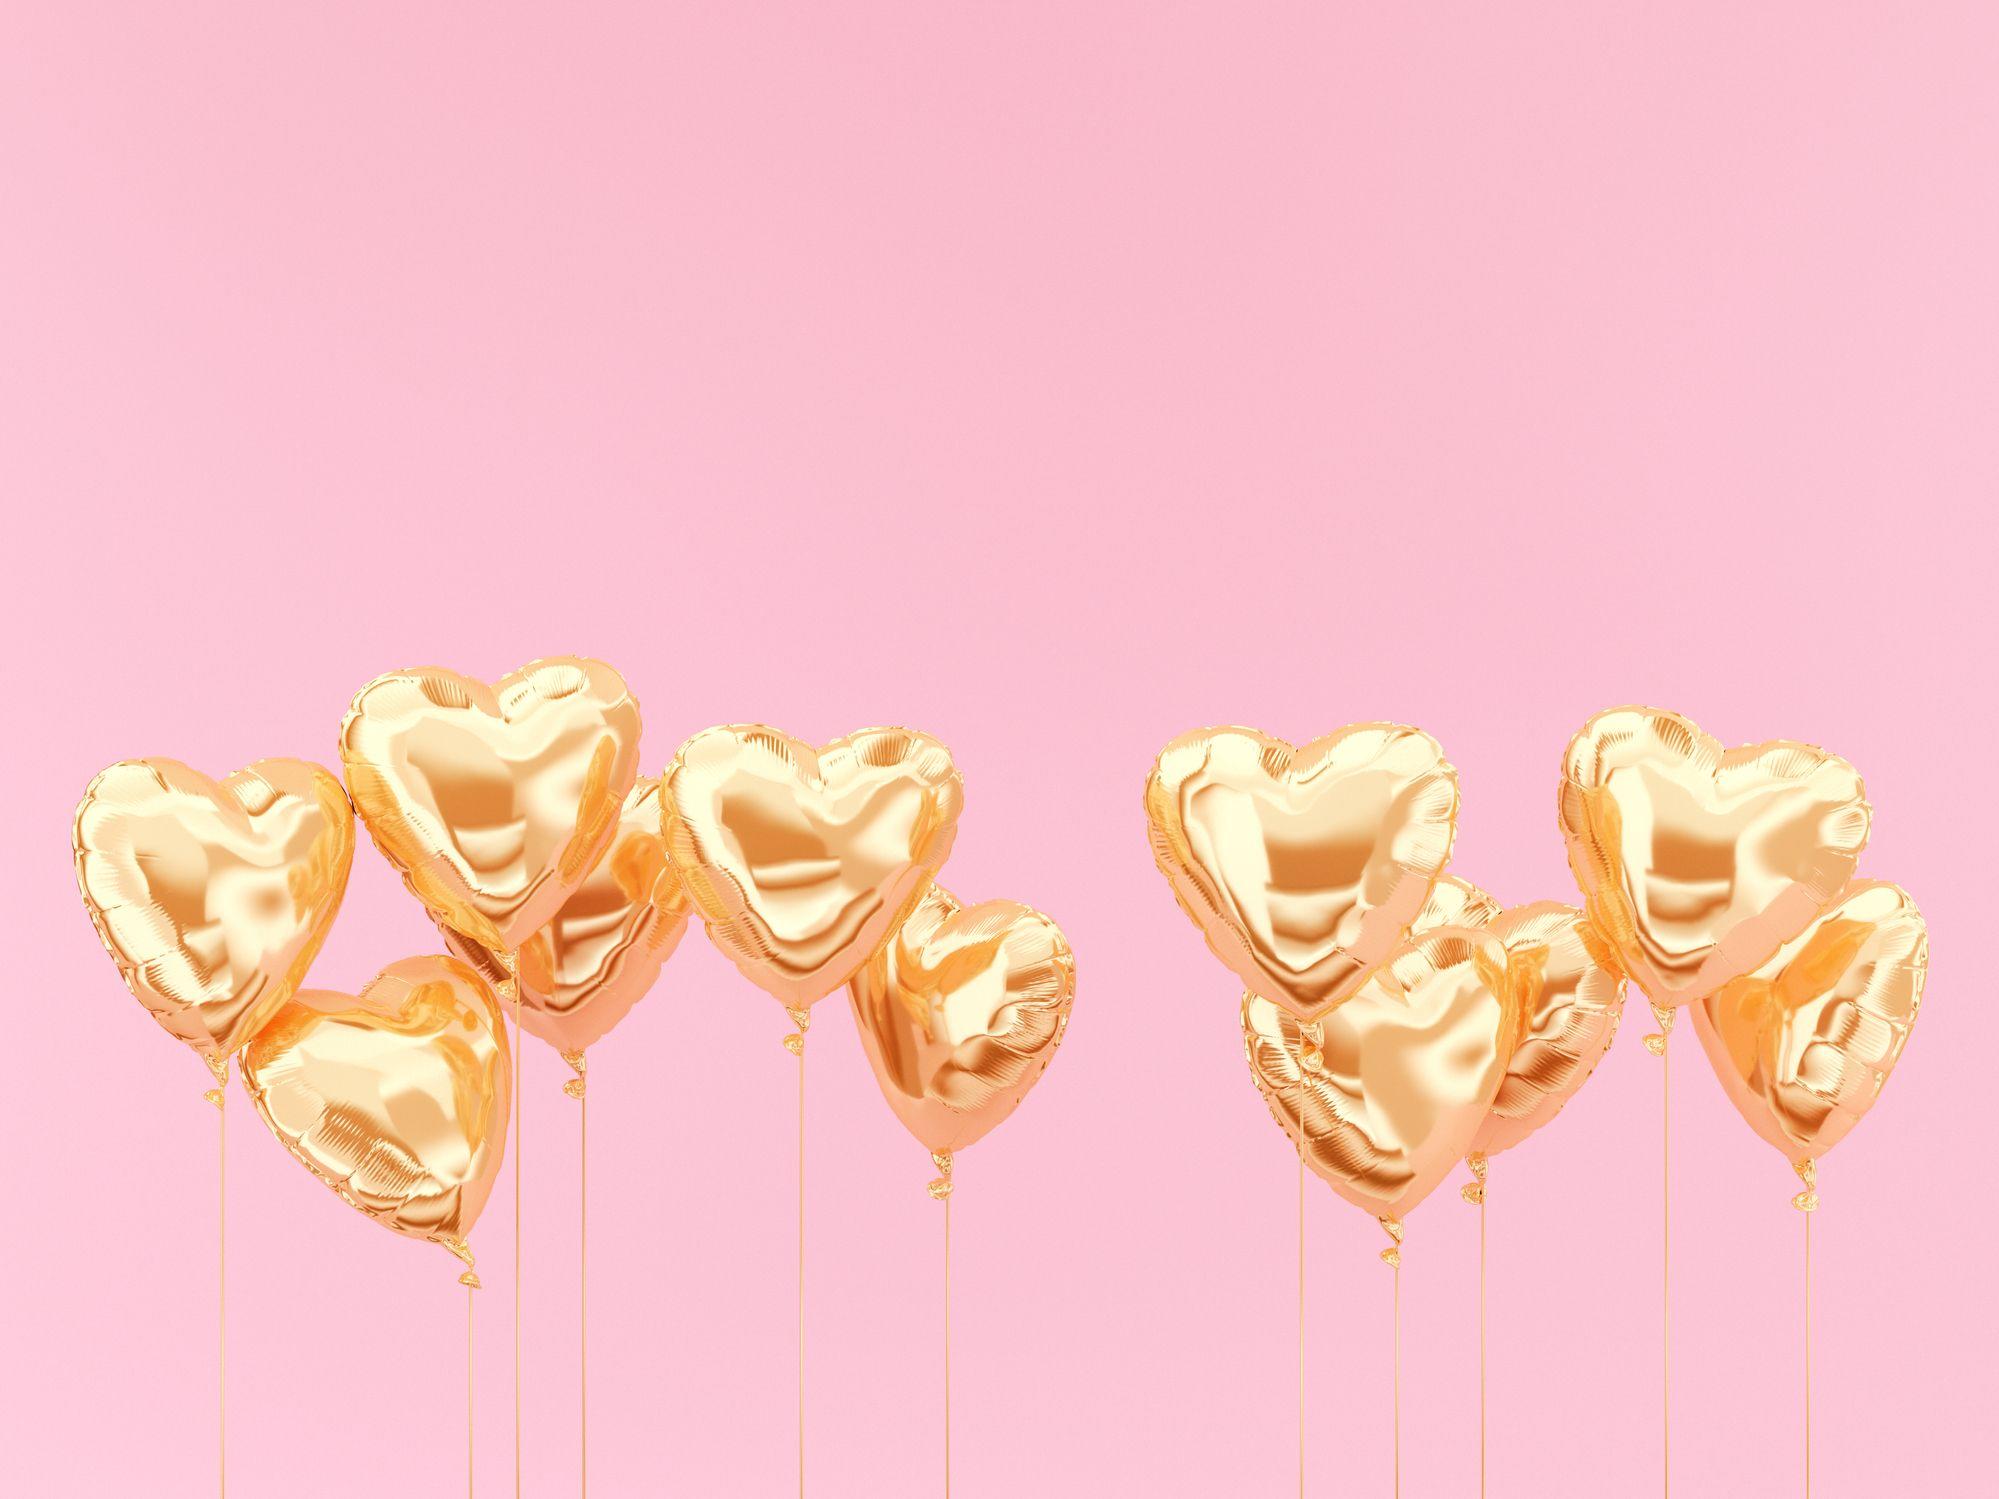 The Sweetest Quotes to Share With All of Your Pals on Valentine's Day